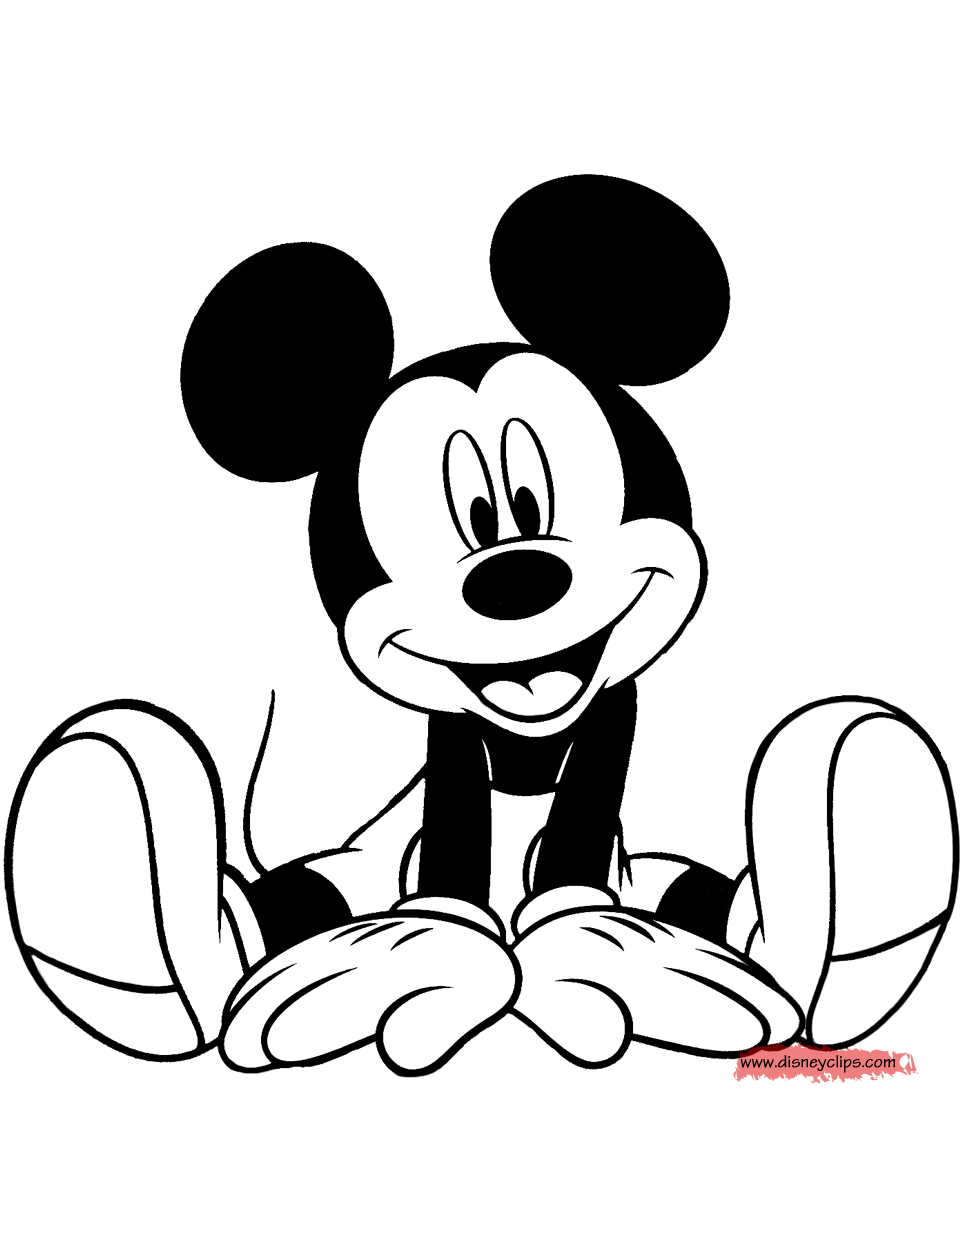 Mickey Mouse Sketch Coloring Page